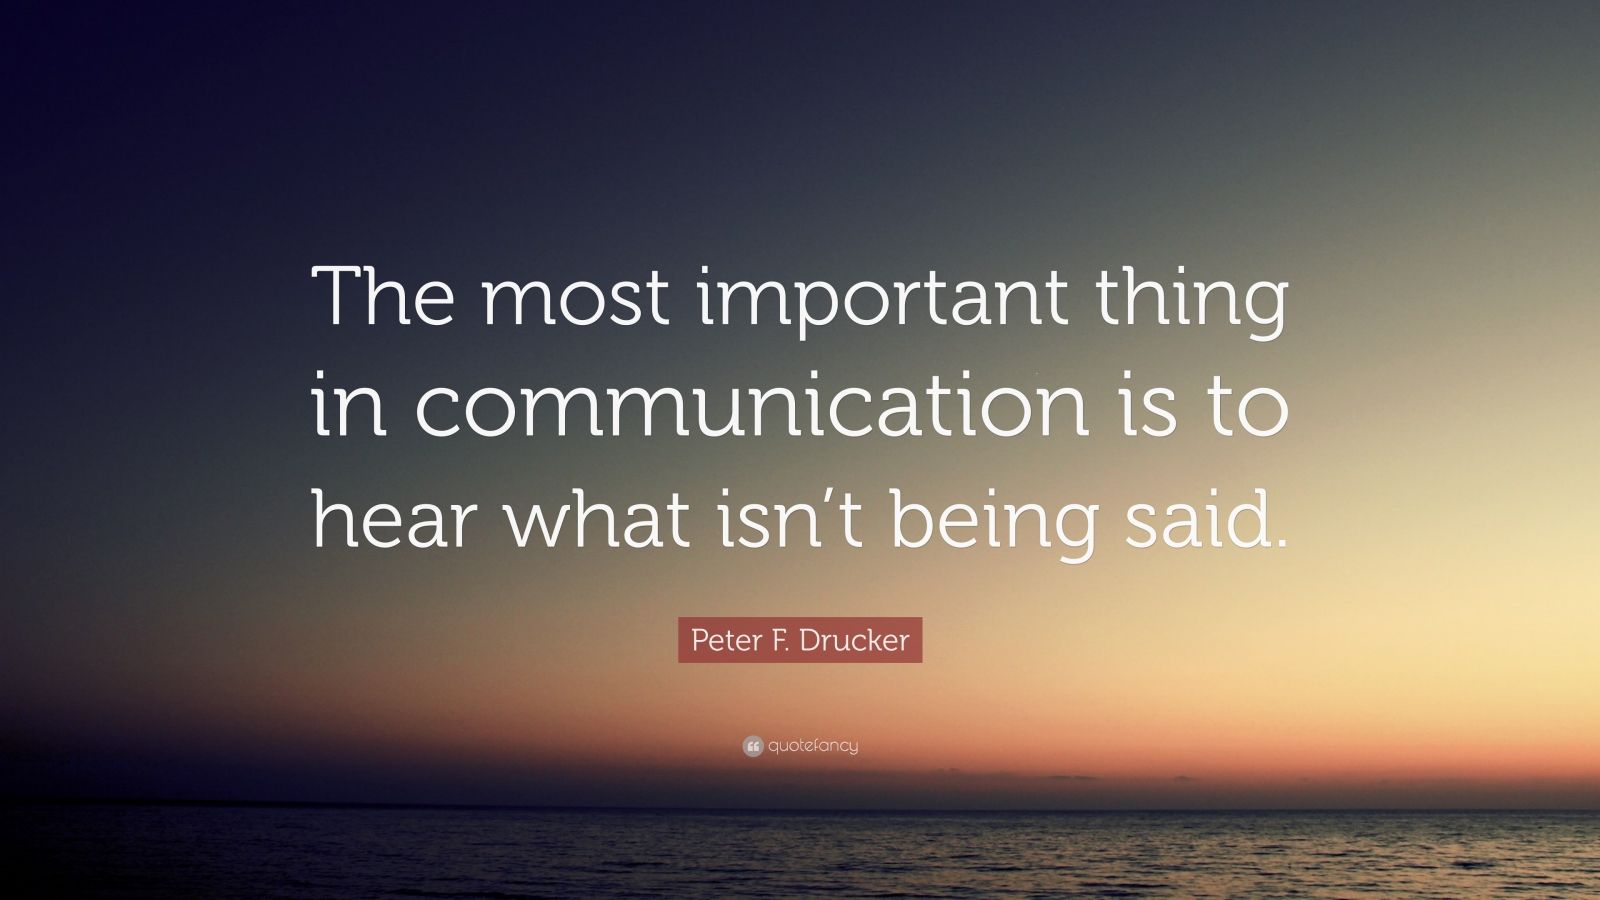 Peter F. Drucker Quote: “The most important thing in communication is